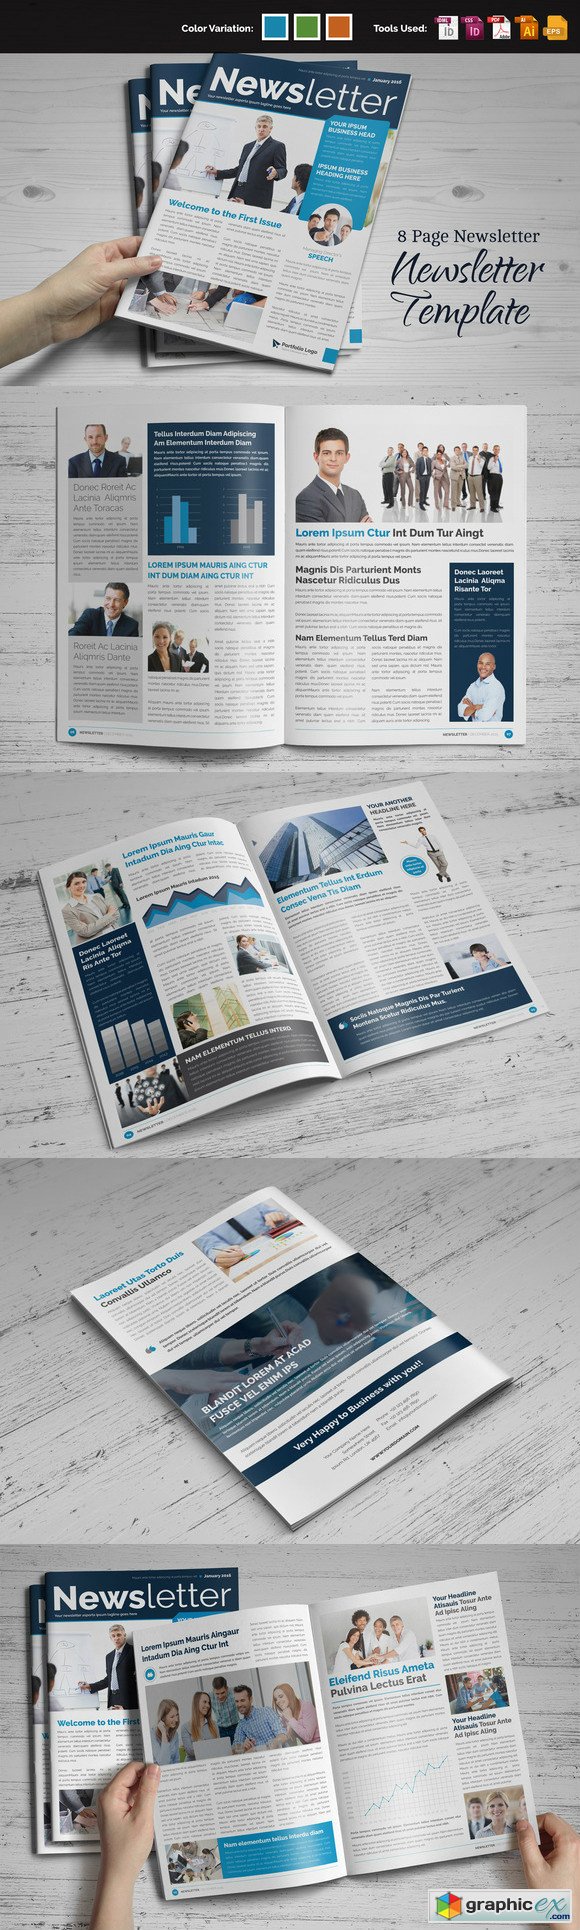 Newsletter Indesign Template 464762